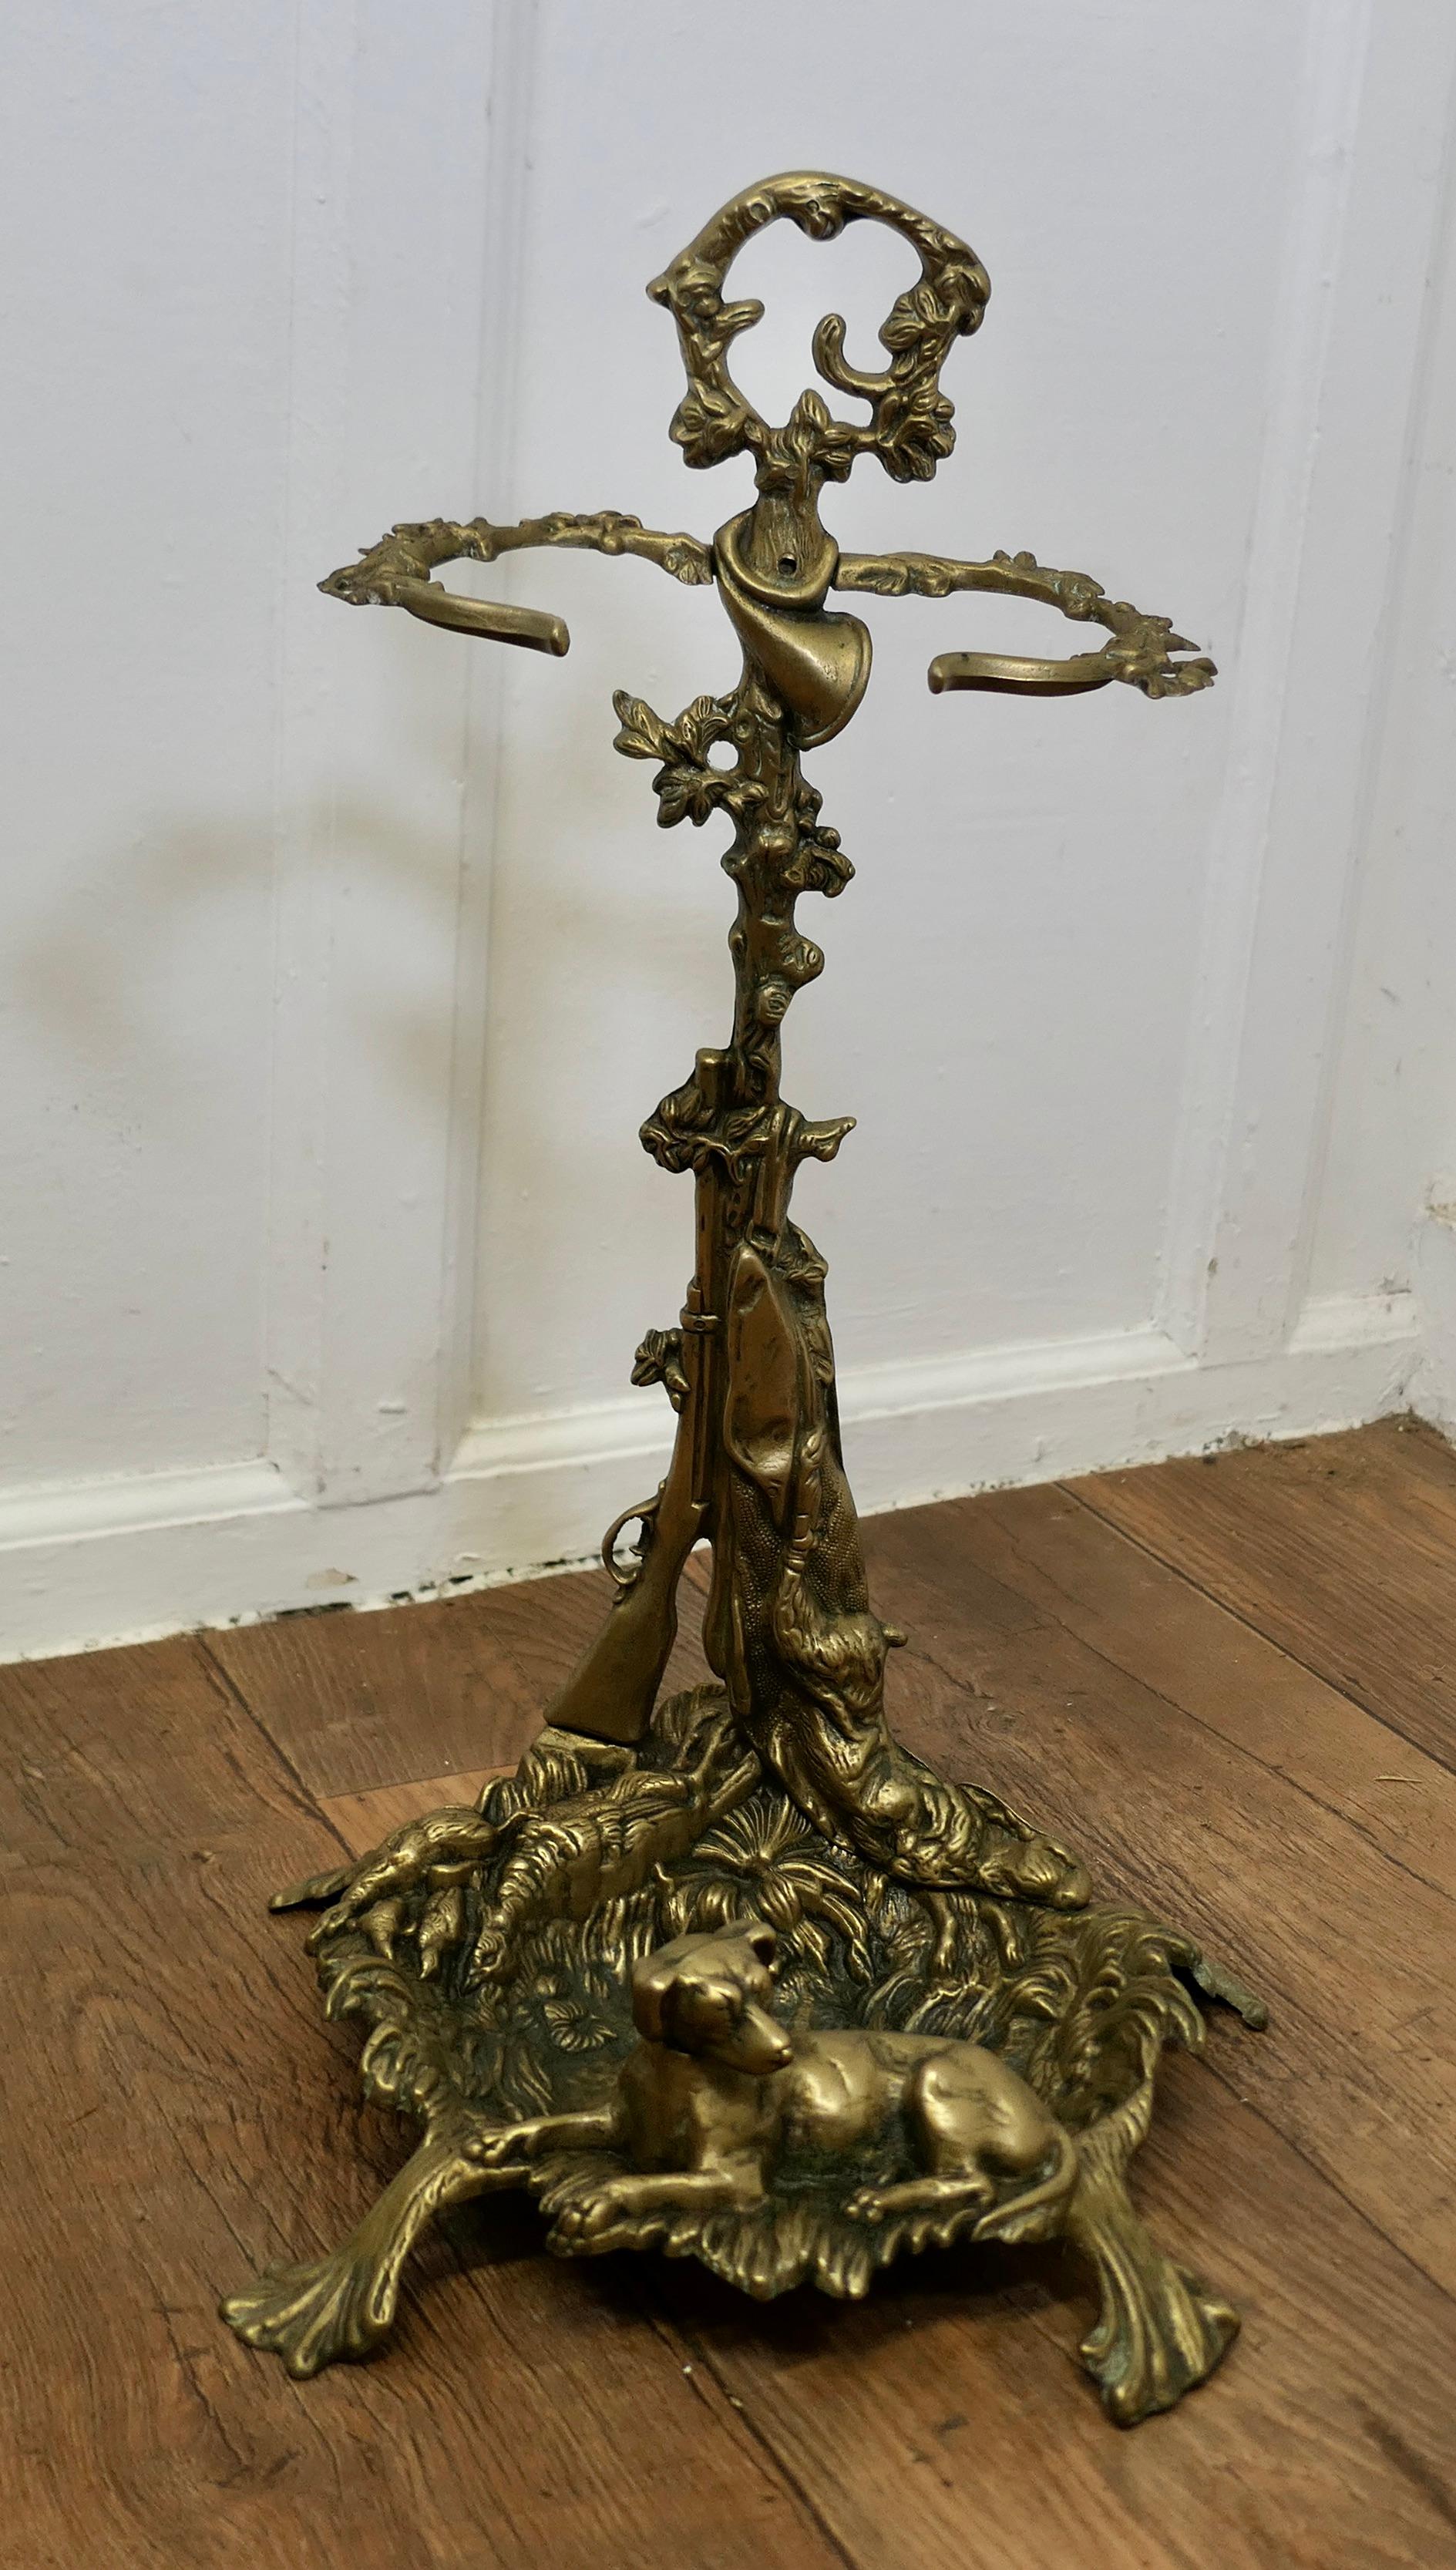 French Hunting Theme (Chasse) Brass Stick Stand 

This lovely piece comes from France, it is in the Chasse style and decorated with a hunting dog, Gun, Horn, all the trappings needed for the hunt
The stand is in excellent condition, it is 22” high